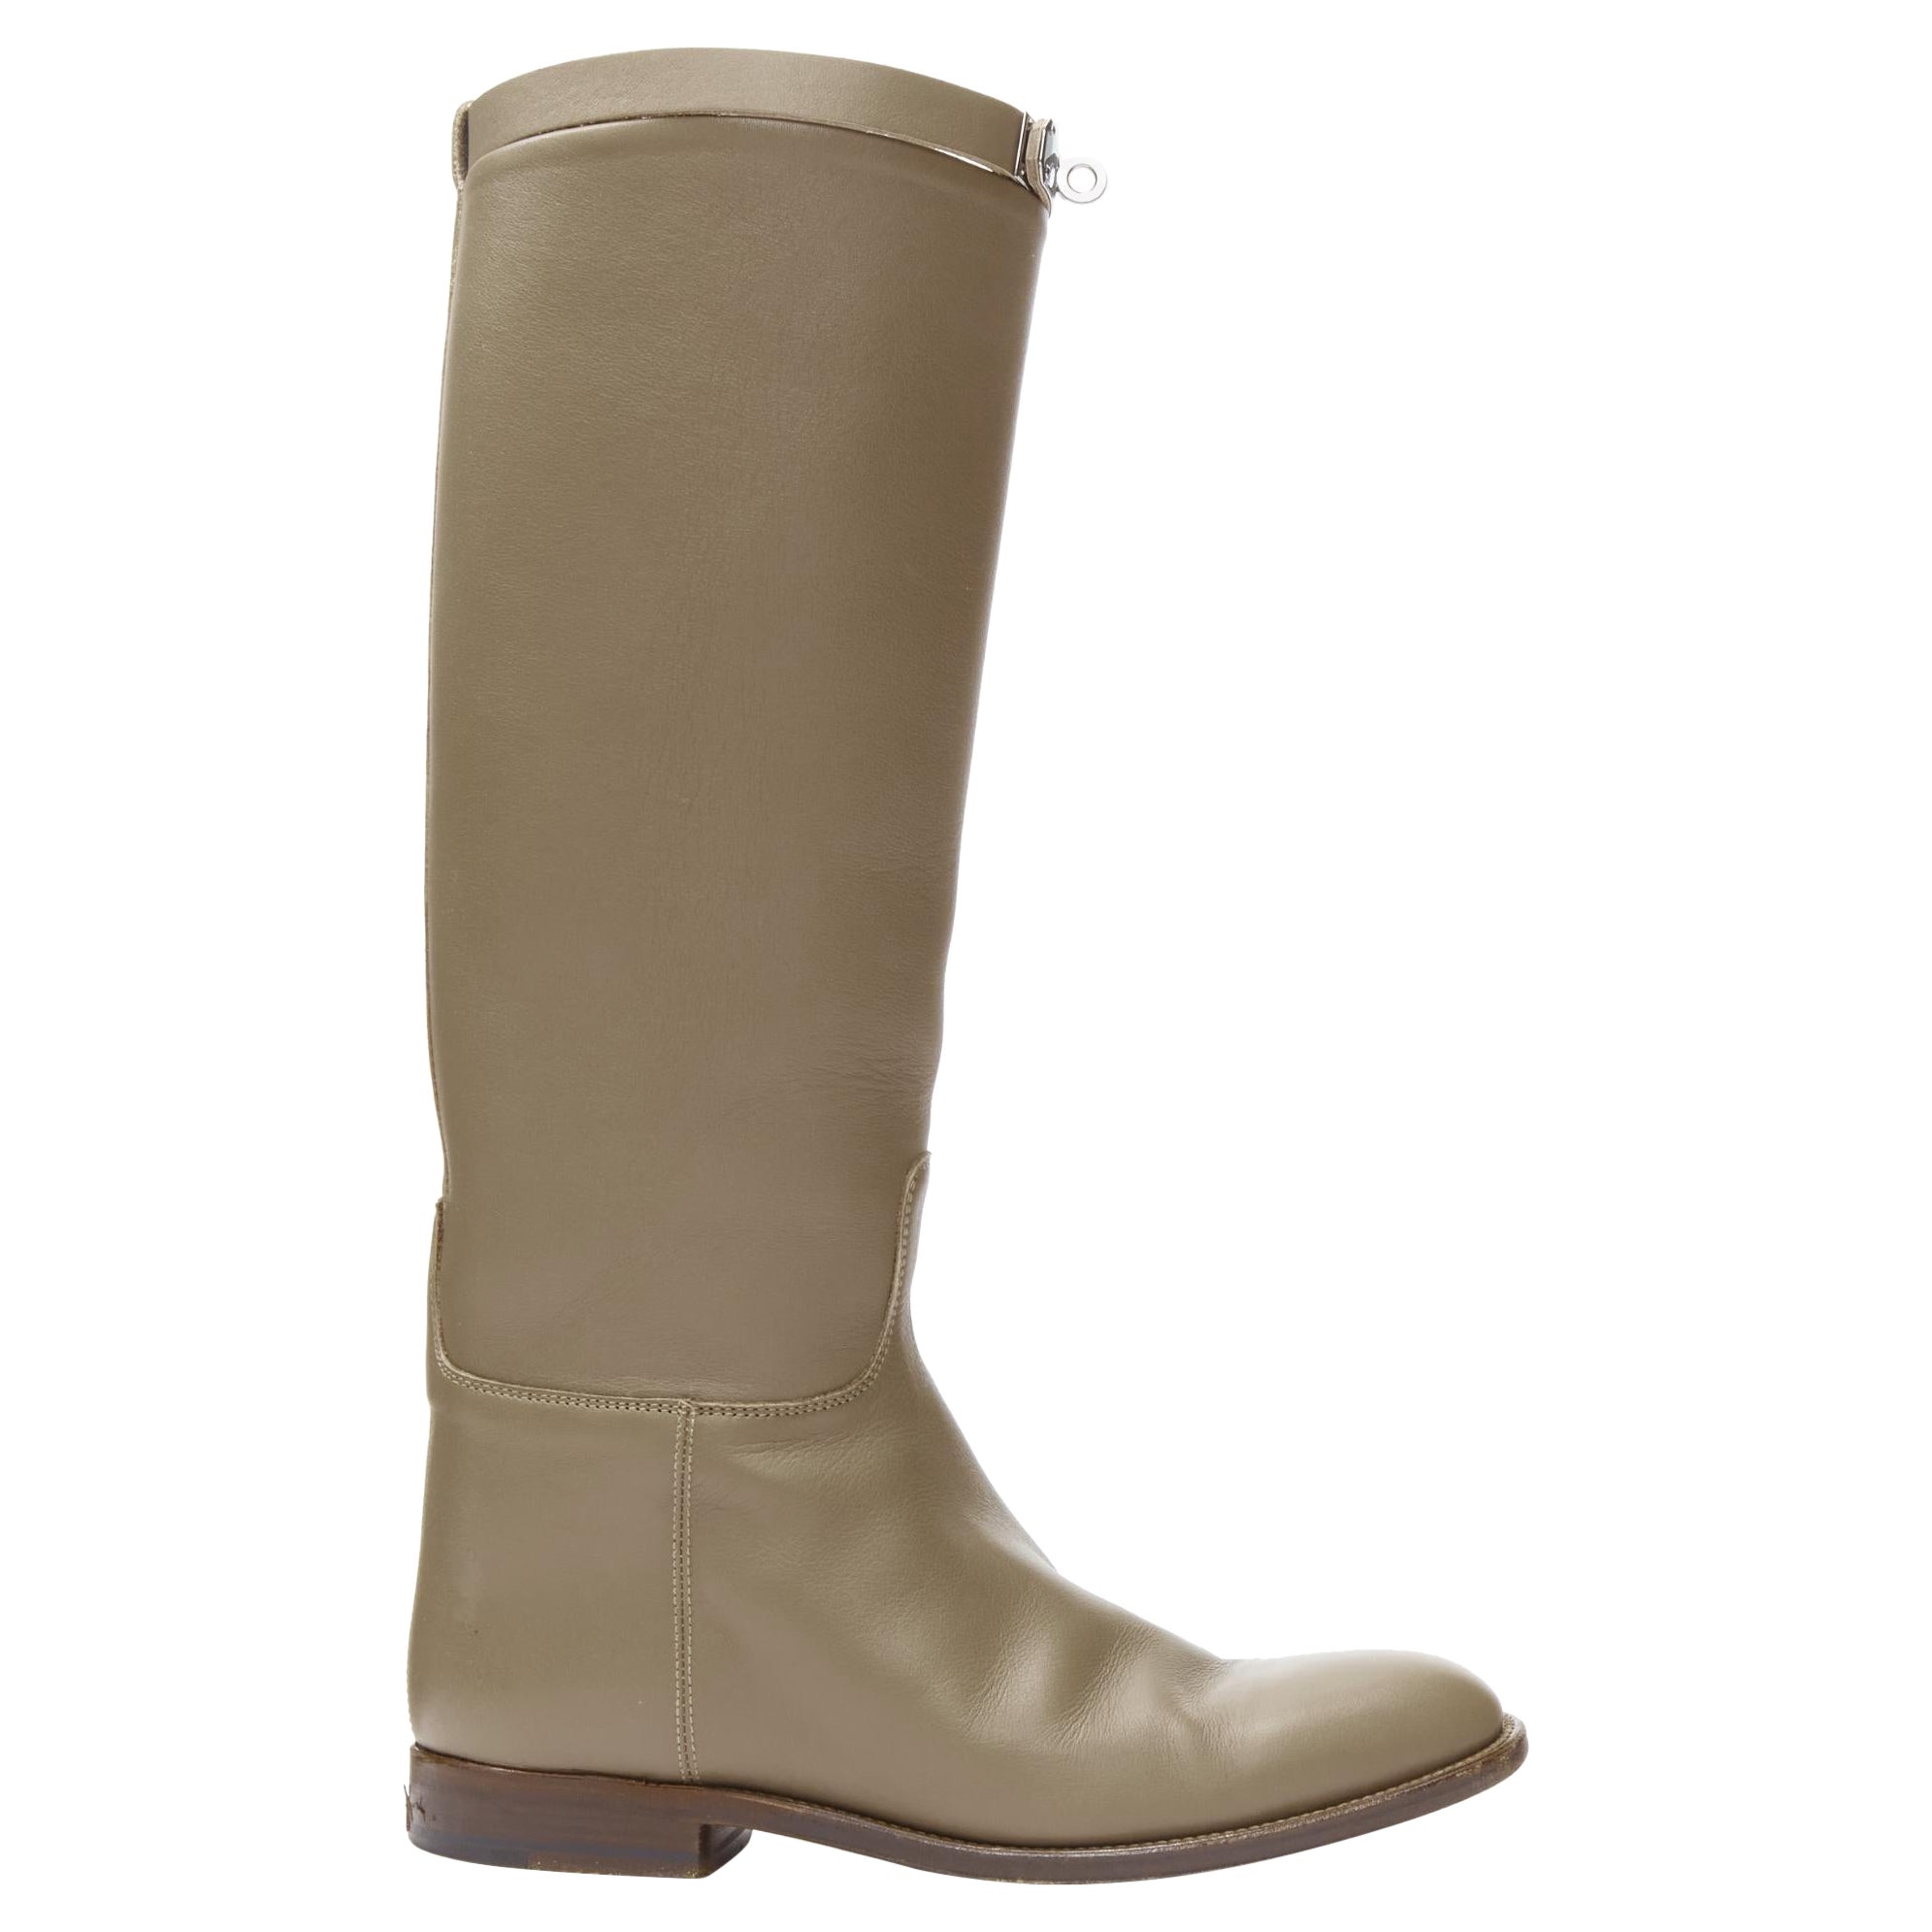 HERMES Kelly Jumping taupe brown PHW buckle riding boot EU37.5 For Sale